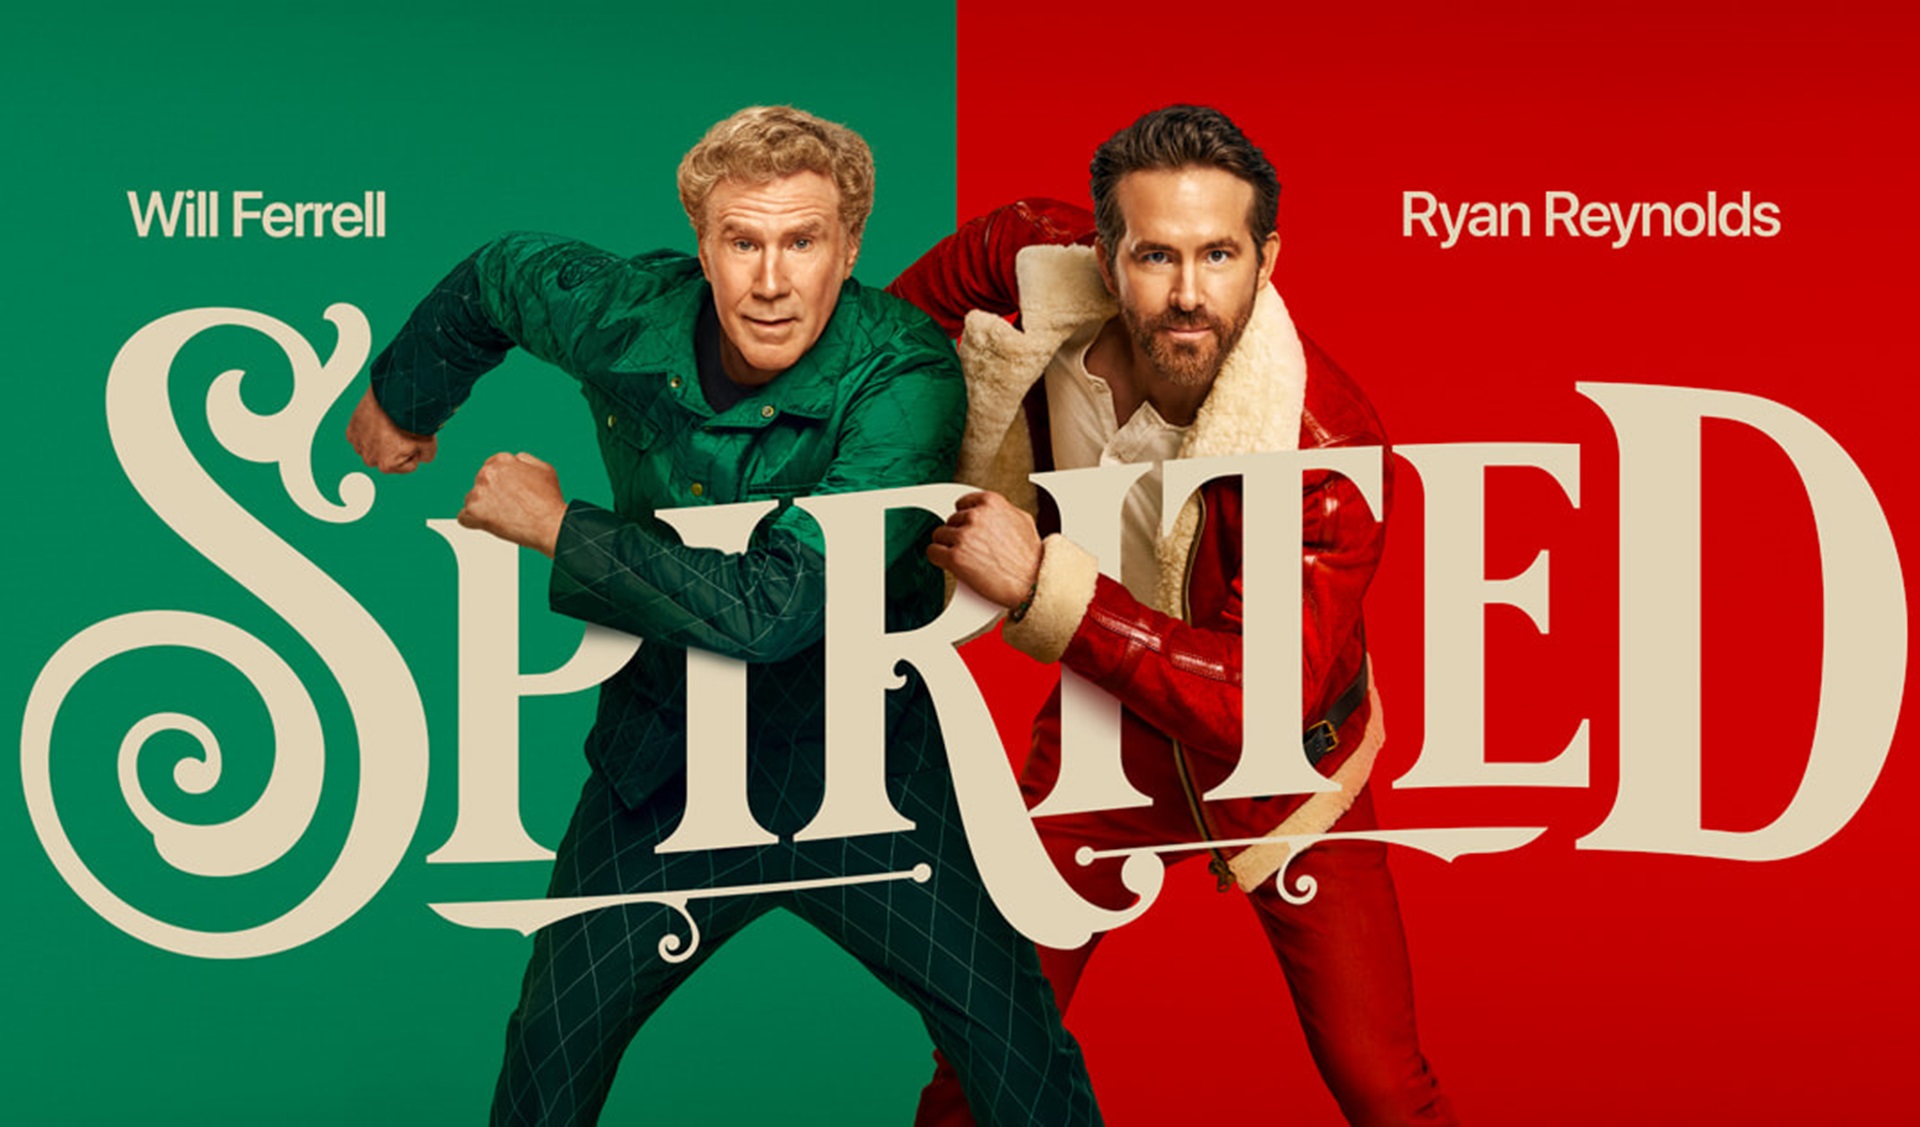 <p>'Spirited' offers the grown-ups some respite from all the holiday kiddie films, but don't worry it is still very family friendly. Packed full of fun and humor, plus the combination of Will Ferrell and Ryan Reynolds is a win!</p>